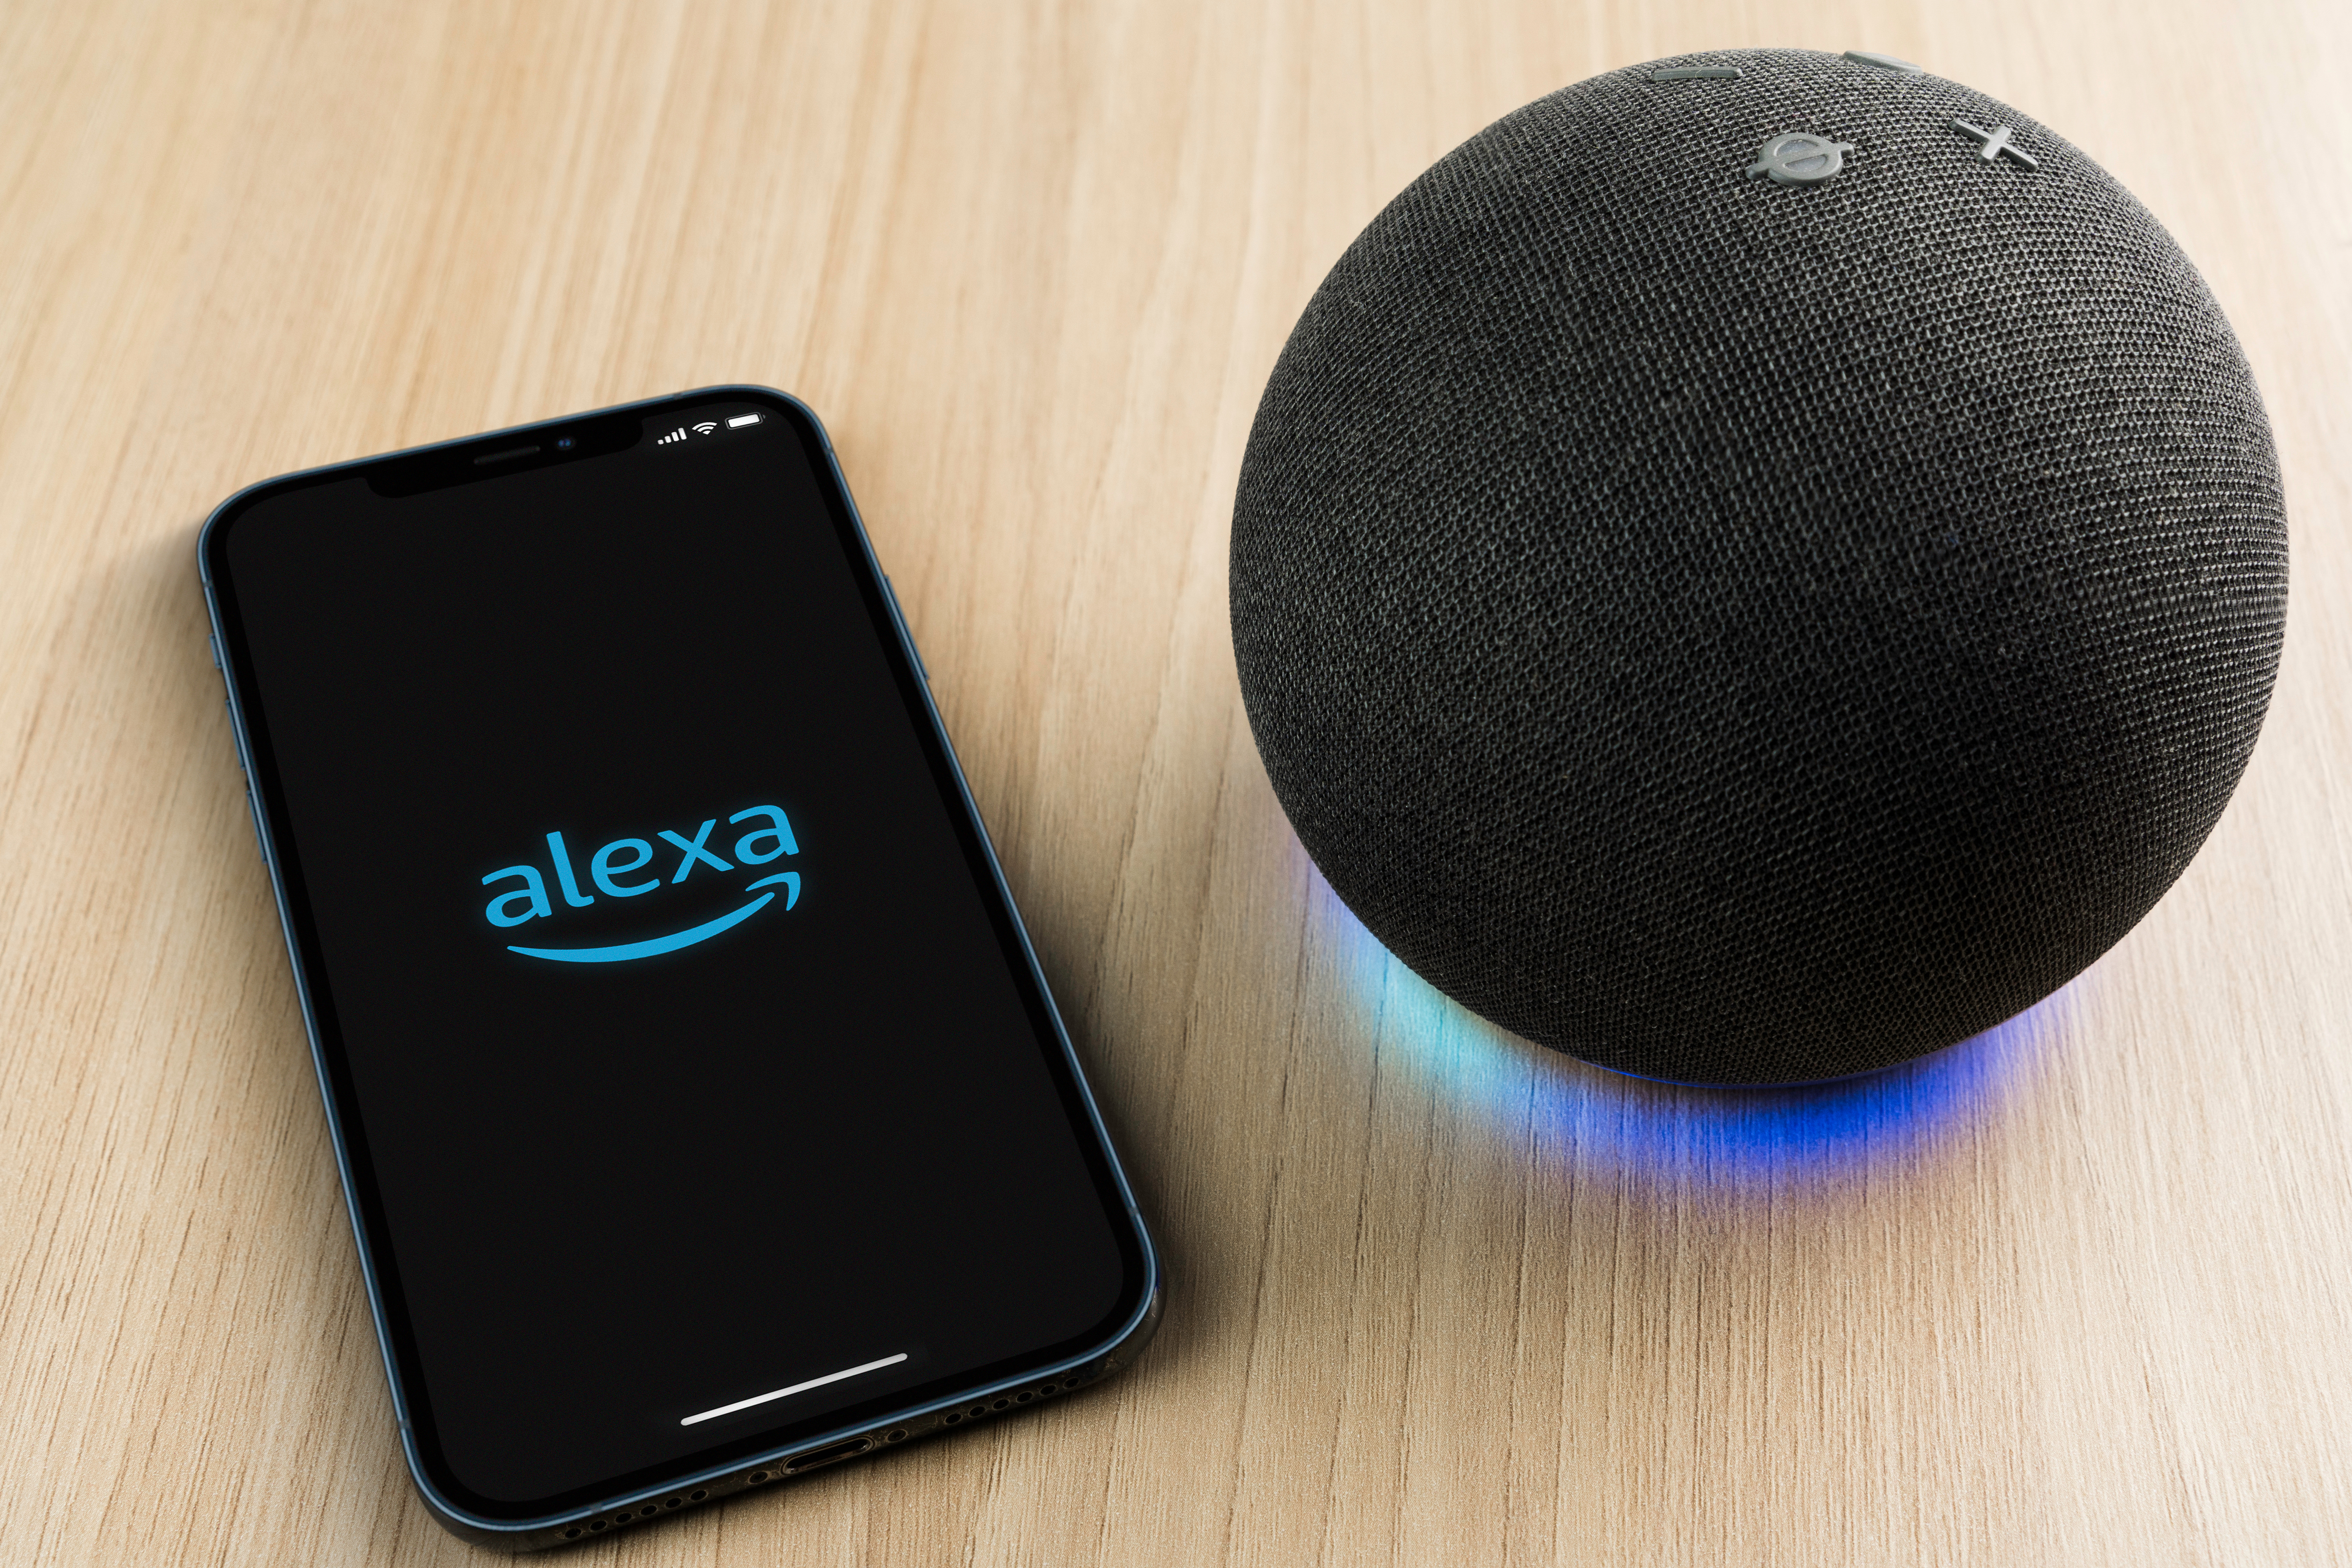 Alexa example brand names and spelling